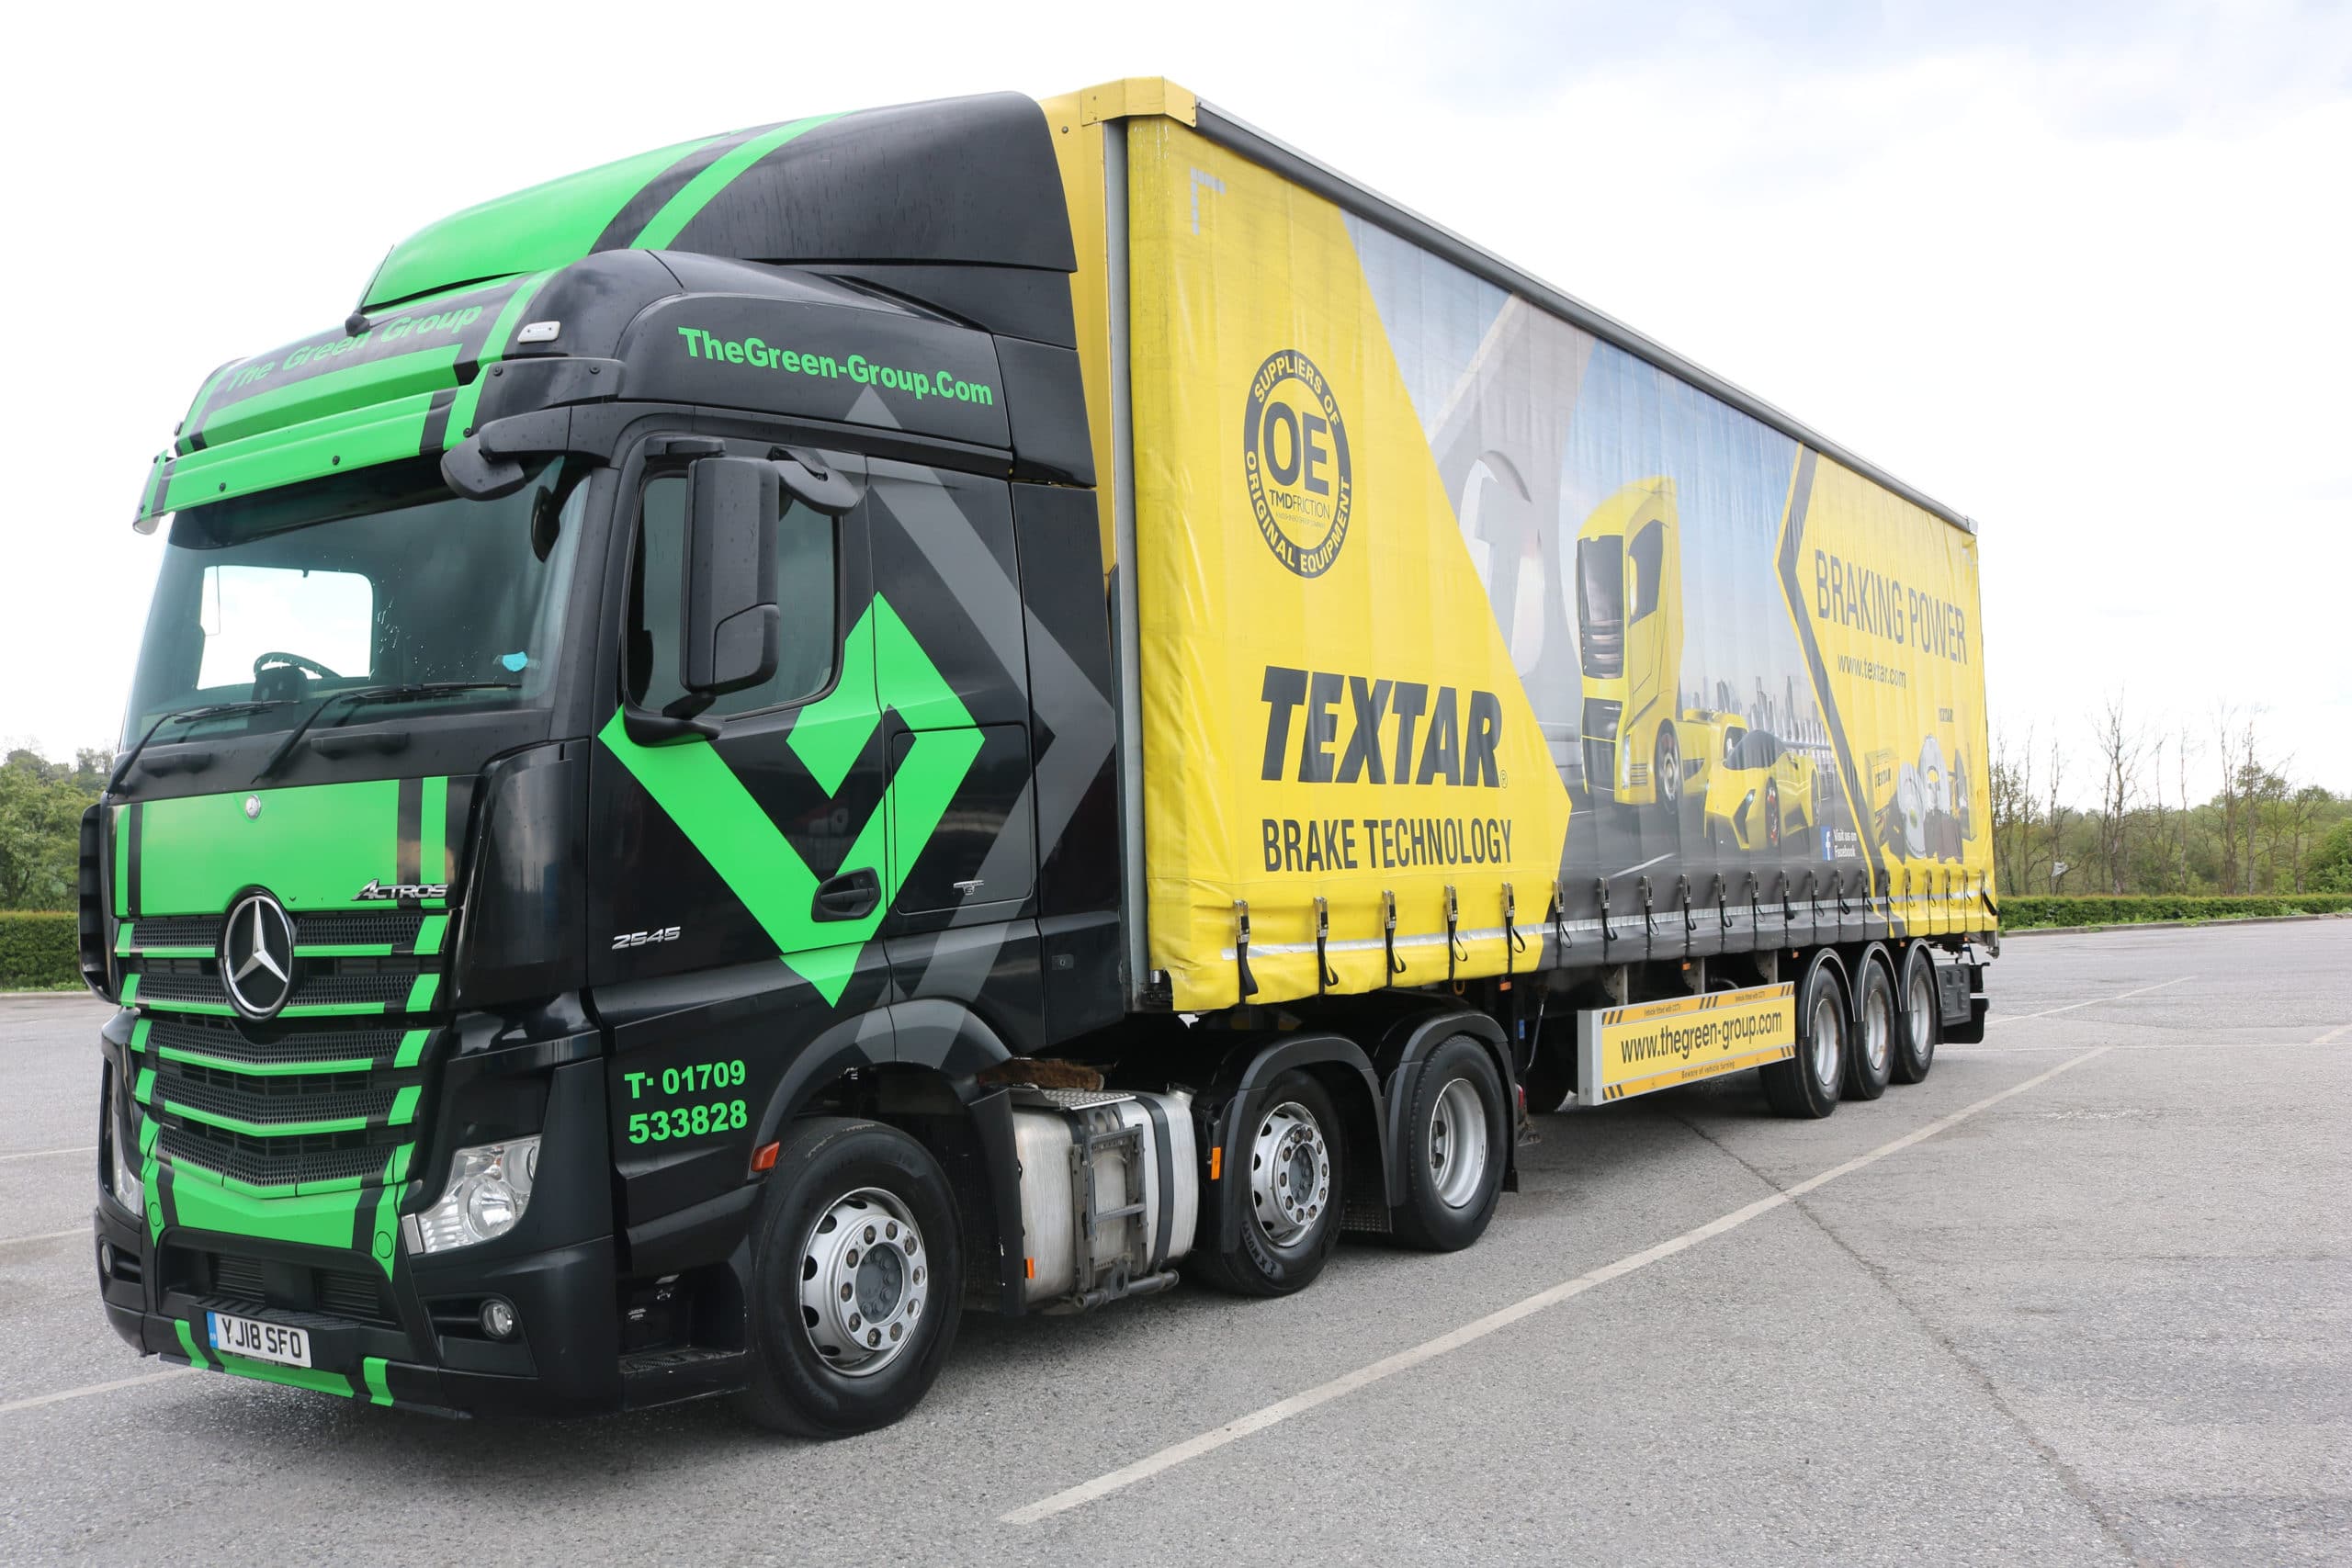 The Textar trailer is hitting the road, traveling 160,000km in the U.K.